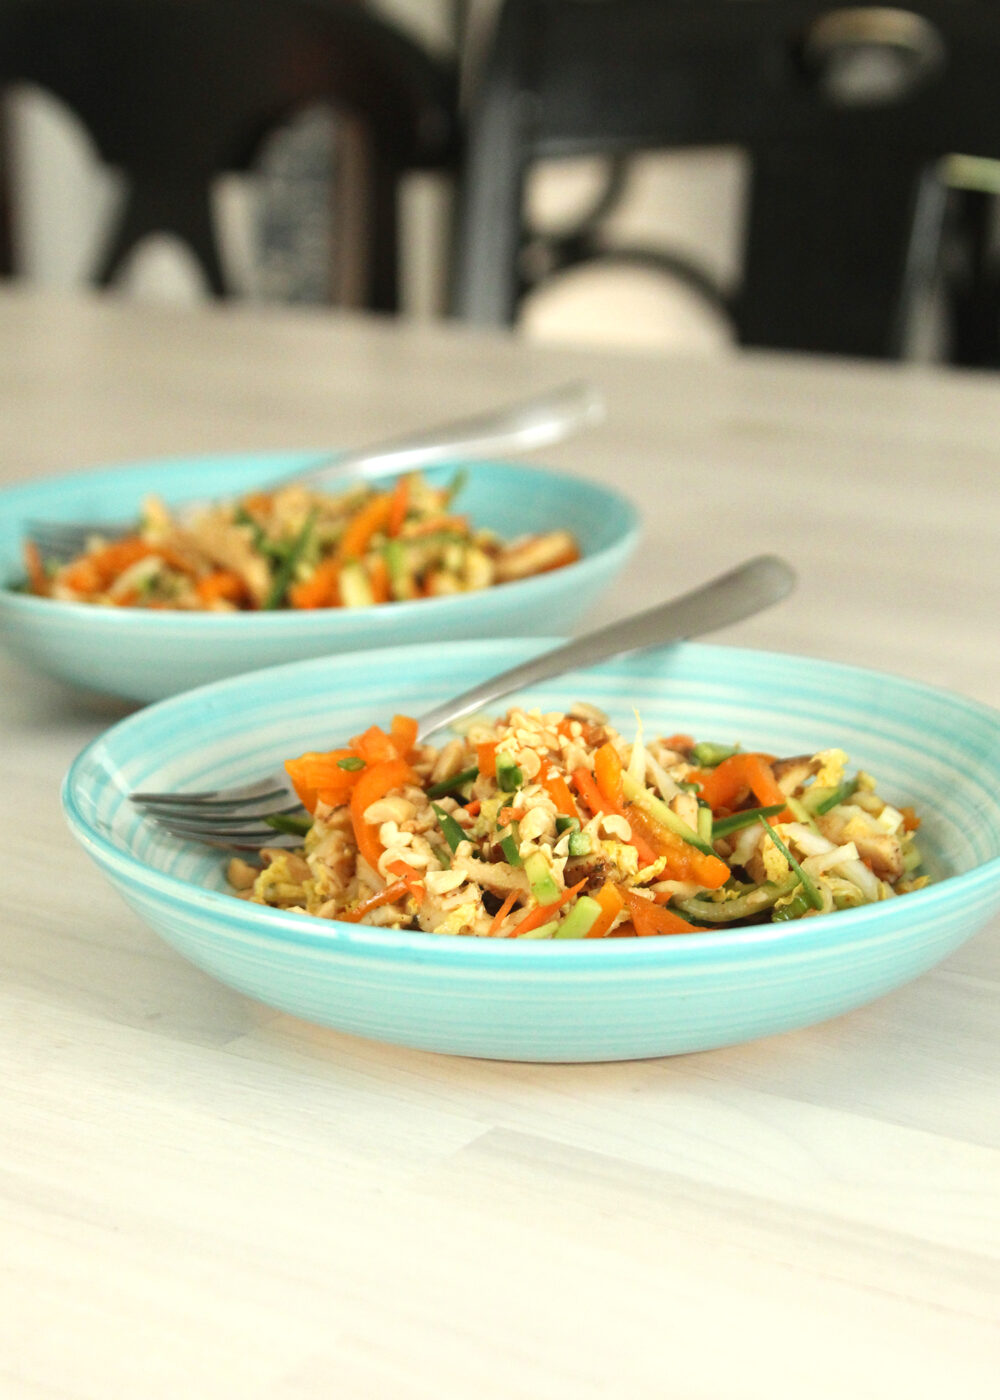 A salad made with lots of julienne cut veggies and a hearty addition of julienne cut chicken is shown in two teal bowls on a wooden surface. 